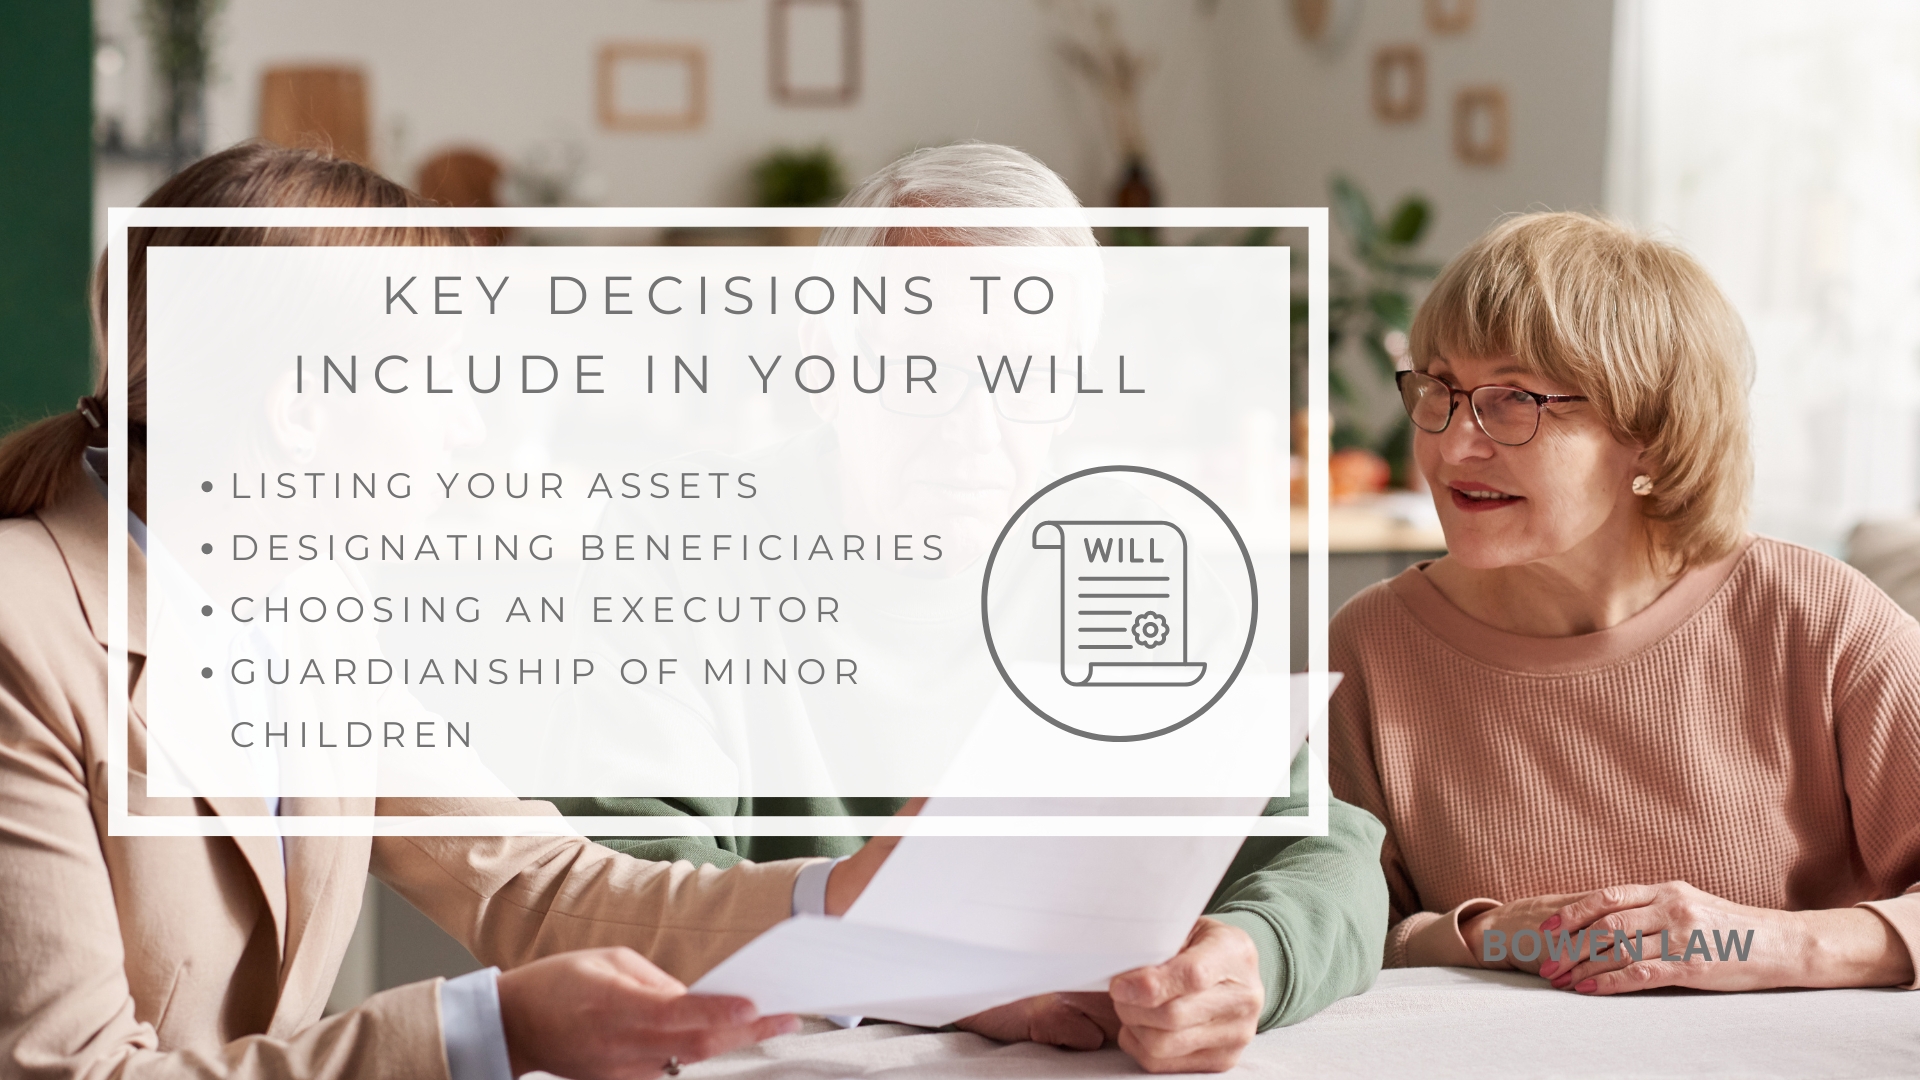 Infographic image of key decisions to include in your will